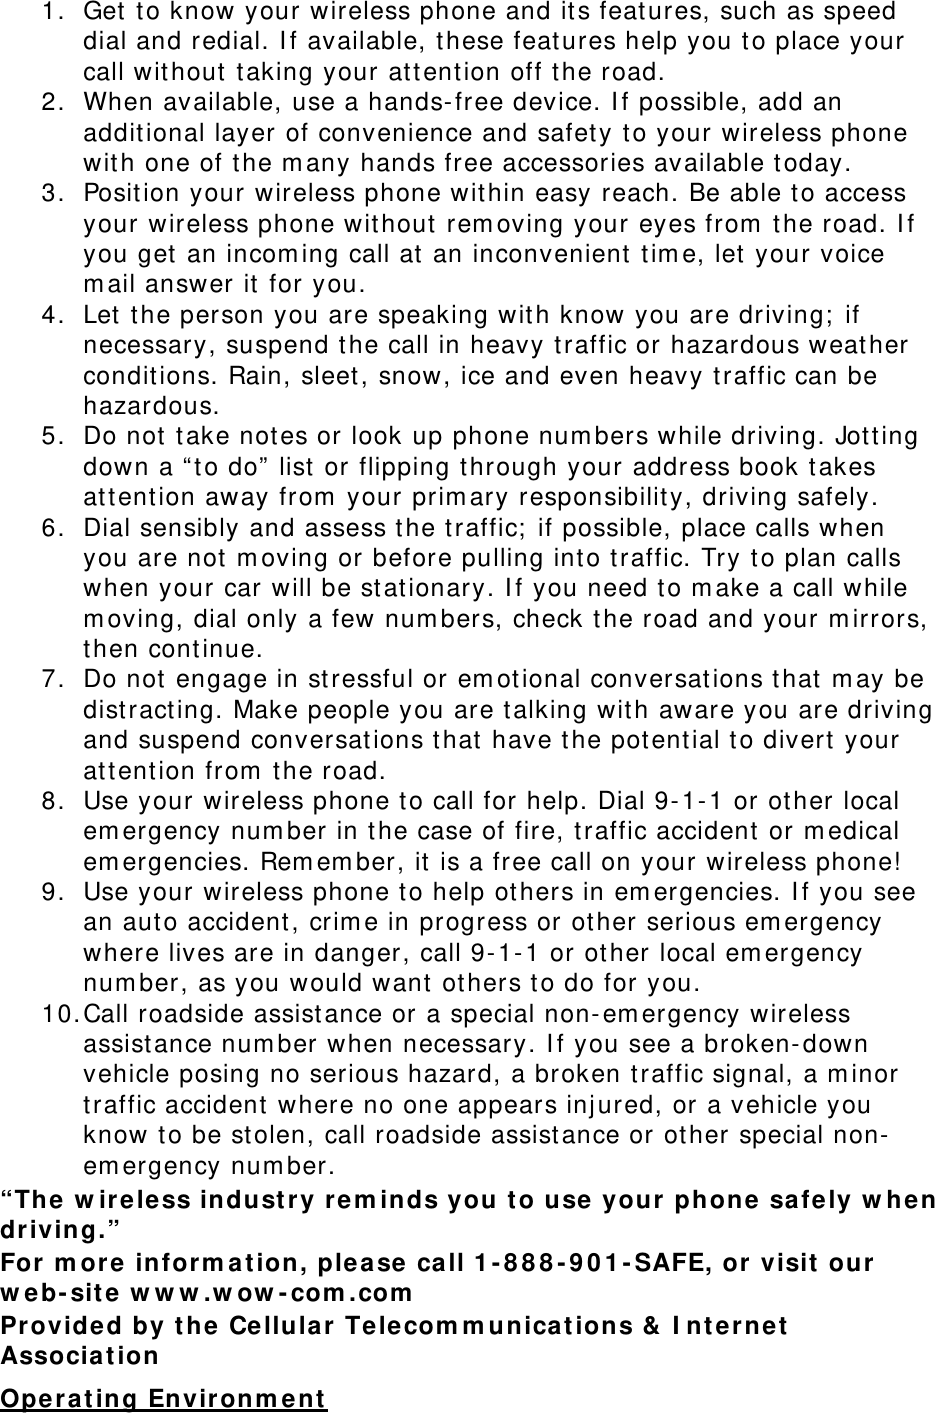 1. Get to know your wireless phone and its features, such as speed dial and redial. If available, these features help you to place your call without taking your attention off the road. 2. When available, use a hands-free device. If possible, add an additional layer of convenience and safety to your wireless phone with one of the many hands free accessories available today. 3. Position your wireless phone within easy reach. Be able to access your wireless phone without removing your eyes from the road. If you get an incoming call at an inconvenient time, let your voice mail answer it for you. 4. Let the person you are speaking with know you are driving; if necessary, suspend the call in heavy traffic or hazardous weather conditions. Rain, sleet, snow, ice and even heavy traffic can be hazardous. 5. Do not take notes or look up phone numbers while driving. Jotting down a “to do” list or flipping through your address book takes attention away from your primary responsibility, driving safely. 6. Dial sensibly and assess the traffic; if possible, place calls when you are not moving or before pulling into traffic. Try to plan calls when your car will be stationary. If you need to make a call while moving, dial only a few numbers, check the road and your mirrors, then continue. 7. Do not engage in stressful or emotional conversations that may be distracting. Make people you are talking with aware you are driving and suspend conversations that have the potential to divert your attention from the road. 8. Use your wireless phone to call for help. Dial 9-1-1 or other local emergency number in the case of fire, traffic accident or medical emergencies. Remember, it is a free call on your wireless phone! 9. Use your wireless phone to help others in emergencies. If you see an auto accident, crime in progress or other serious emergency where lives are in danger, call 9-1-1 or other local emergency number, as you would want others to do for you. 10. Call roadside assistance or a special non-emergency wireless assistance number when necessary. If you see a broken-down vehicle posing no serious hazard, a broken traffic signal, a minor traffic accident where no one appears injured, or a vehicle you know to be stolen, call roadside assistance or other special non-emergency number. “The wireless industry reminds you to use your phone safely when driving.” For more information, please call 1-888-901-SAFE, or visit our web-site www.wow-com.com Provided by the Cellular Telecommunications &amp; Internet Association Operating Environment 